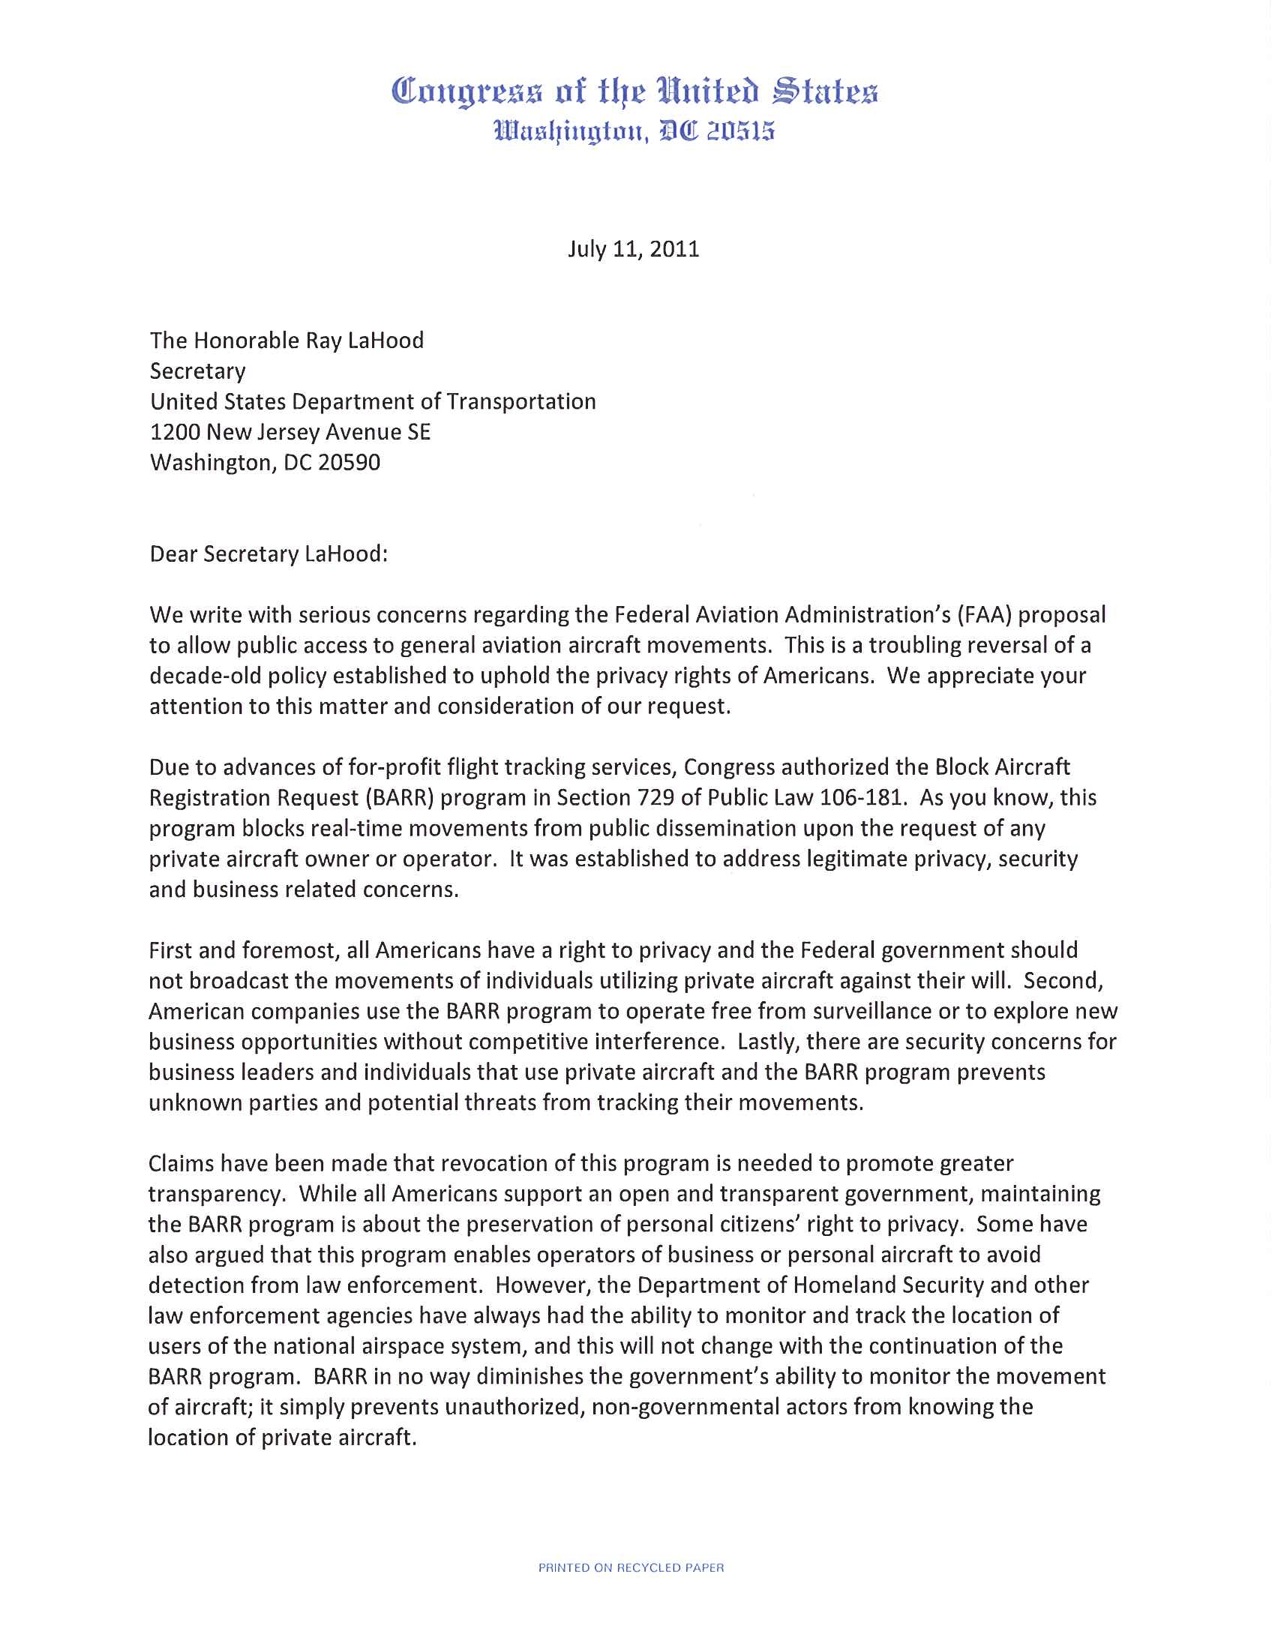 Letter to Secretary Ray LaHood, Department of Transportation